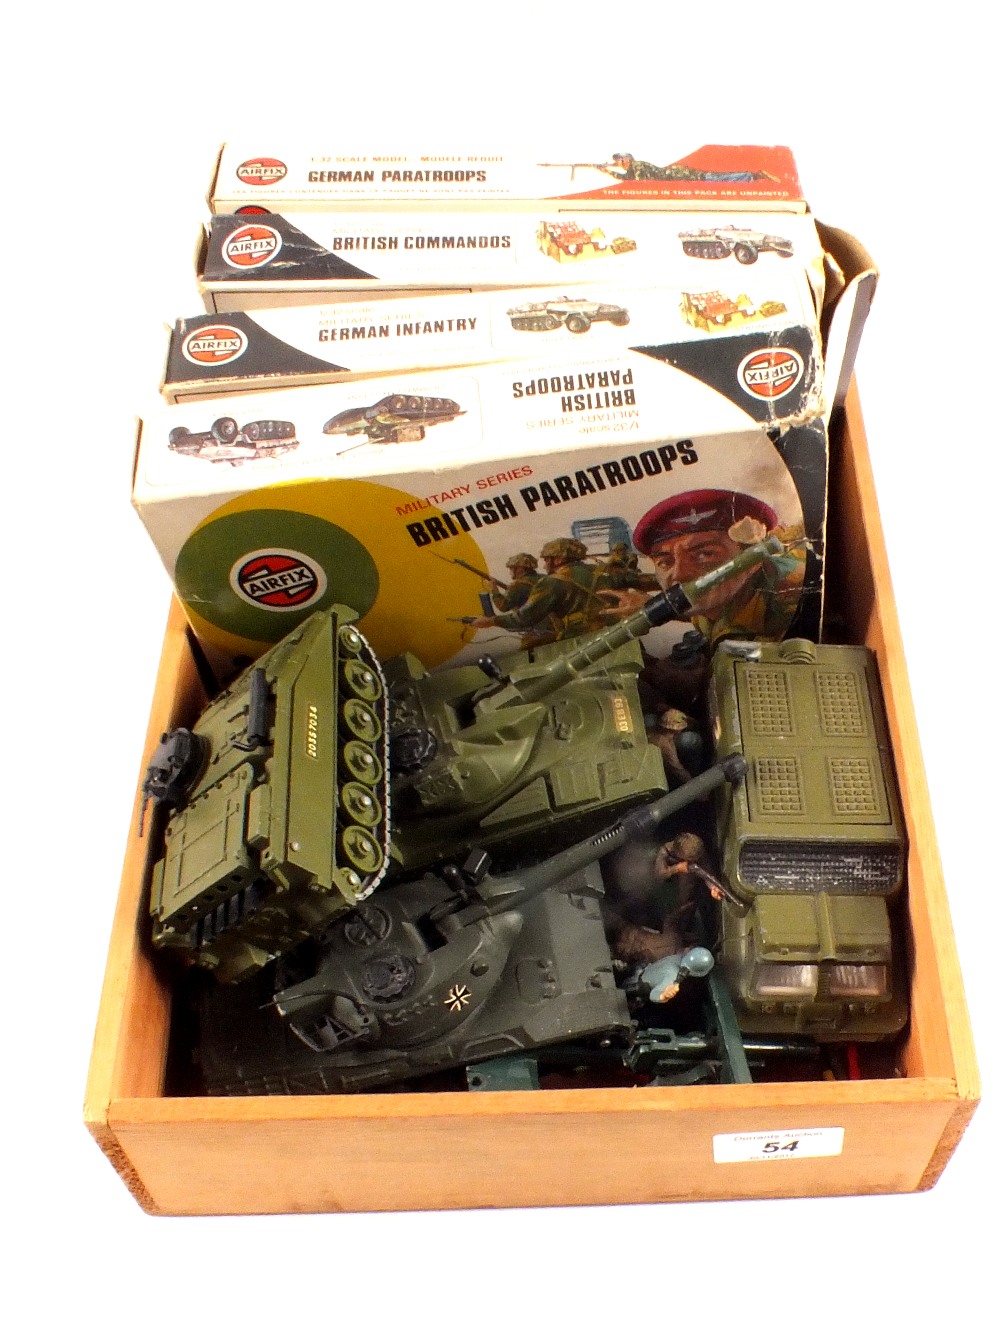 Four boxes of Airfix Military Series figures,